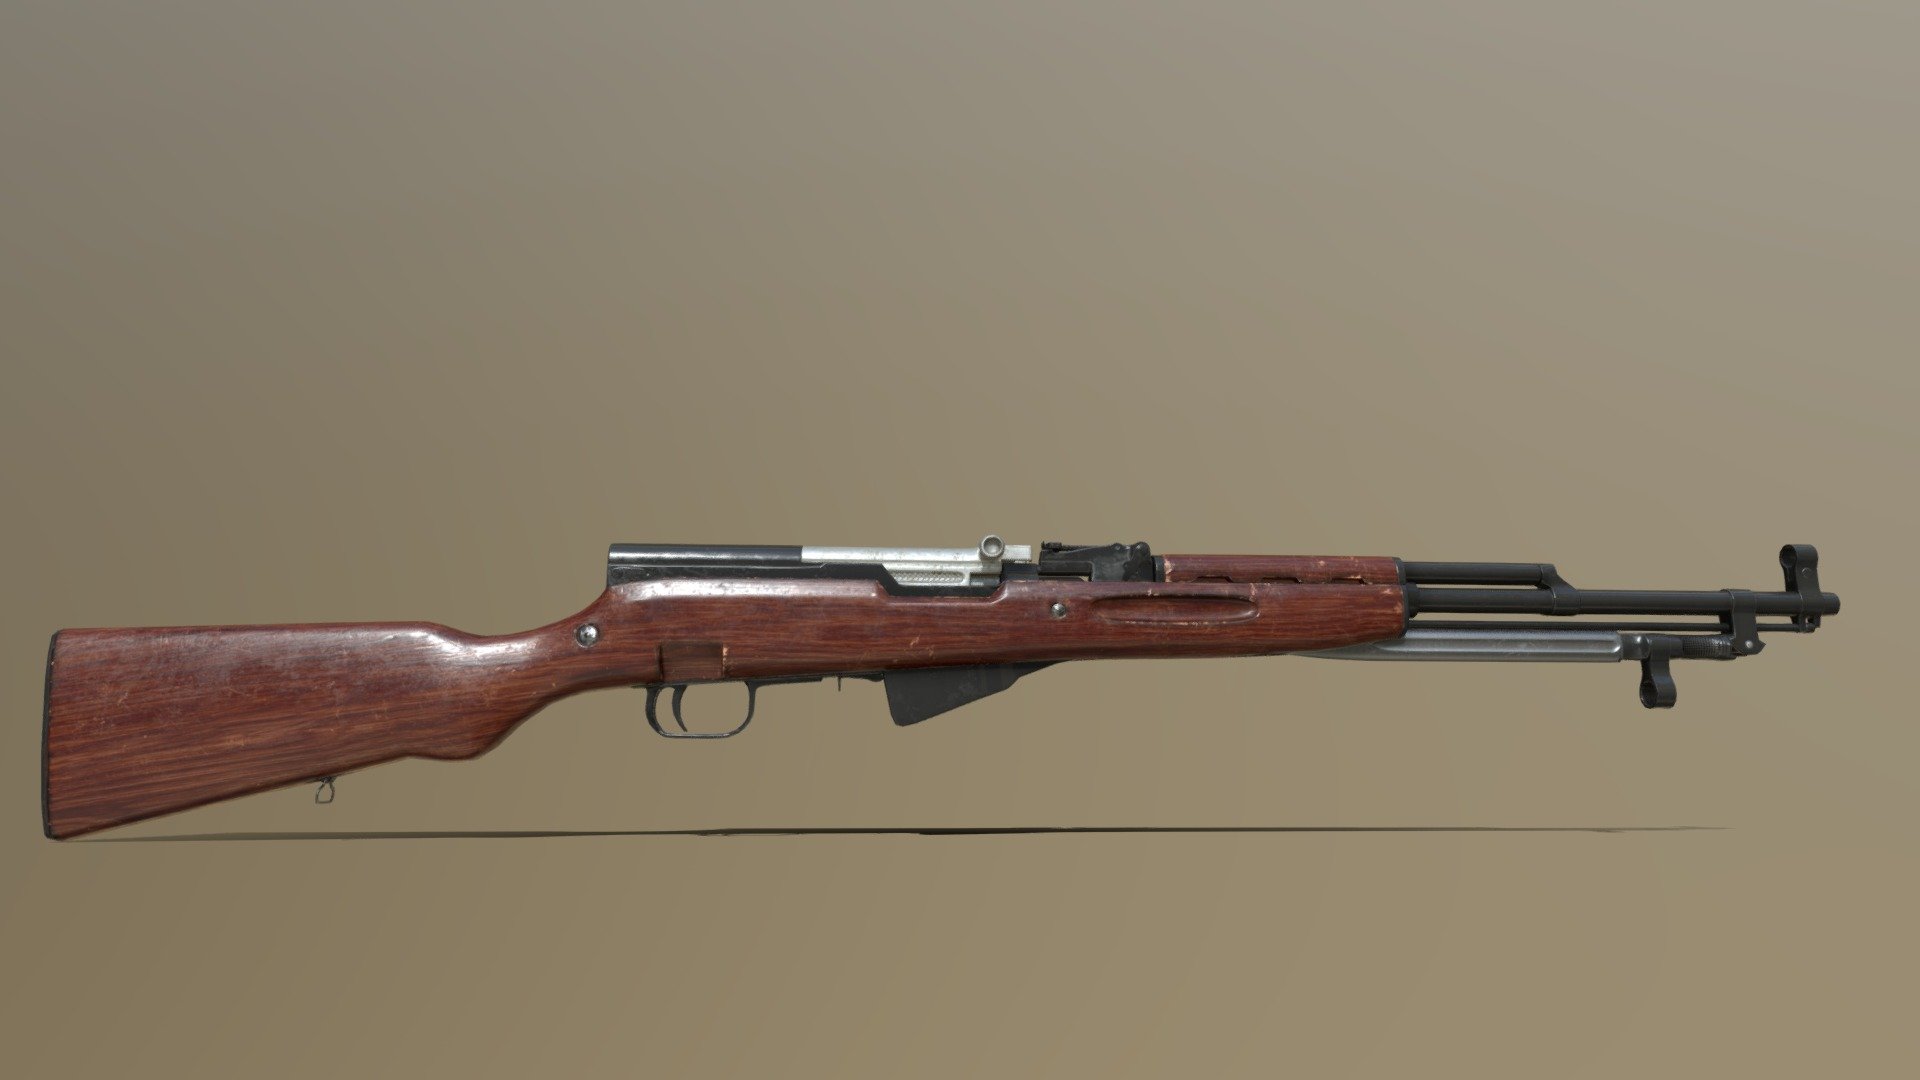 This is a Simonov SKS I modeled in Maya, then baked and textured in Substance Painter. The poly (tri) count is 9,164 and the model is currently using a 2k texture 3d model